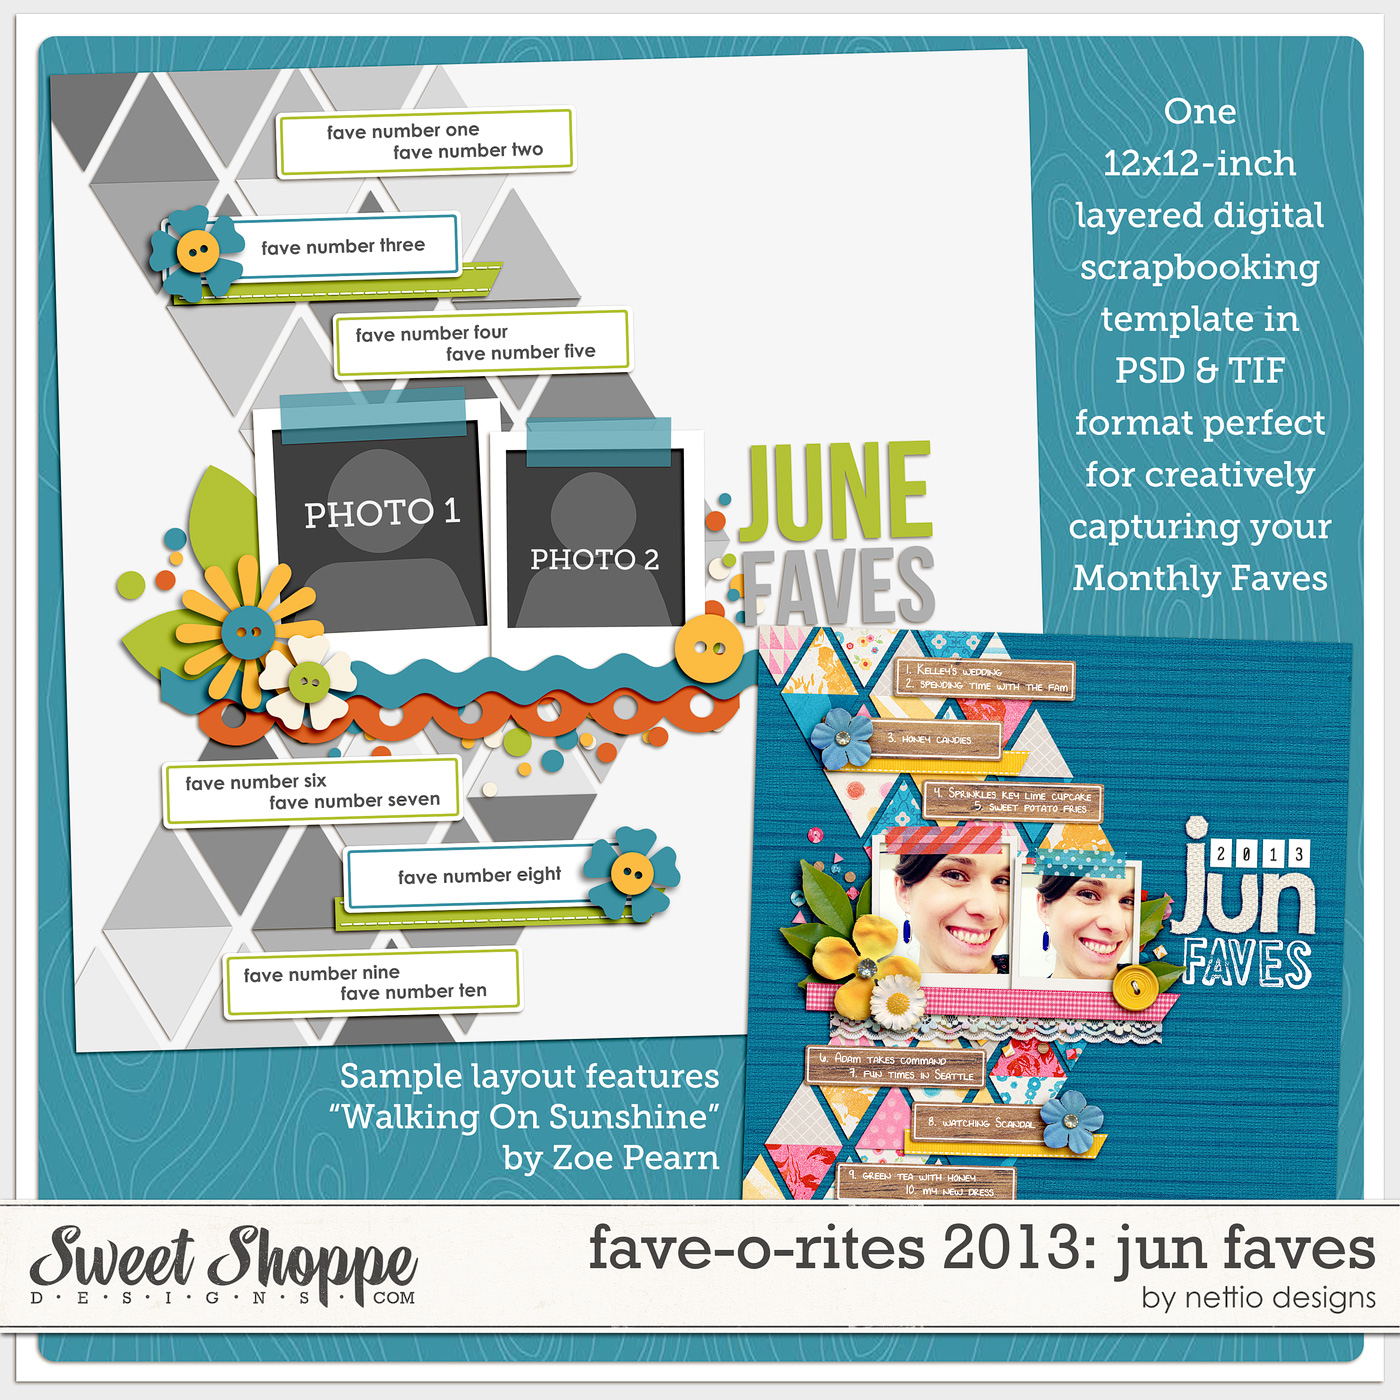 nettiodesigns_FAVE-O-RITES2013_06JunFaves-preview-1400